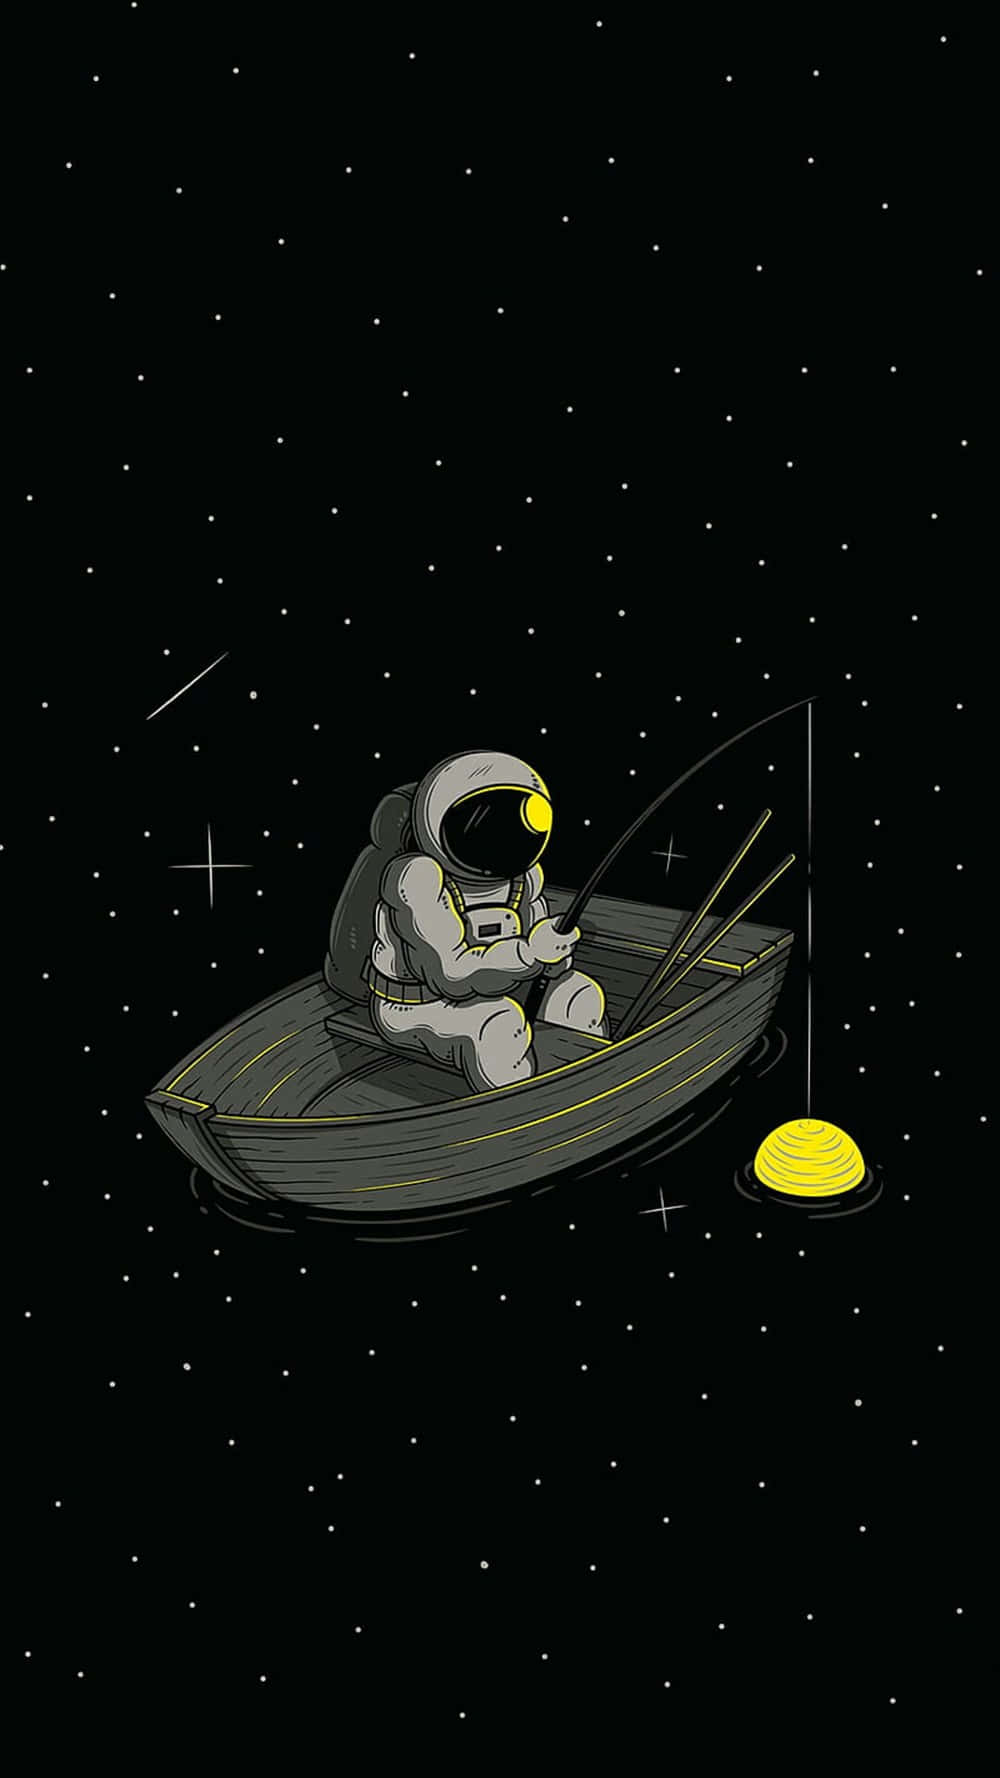 An Astronaut Is Fishing In A Boat